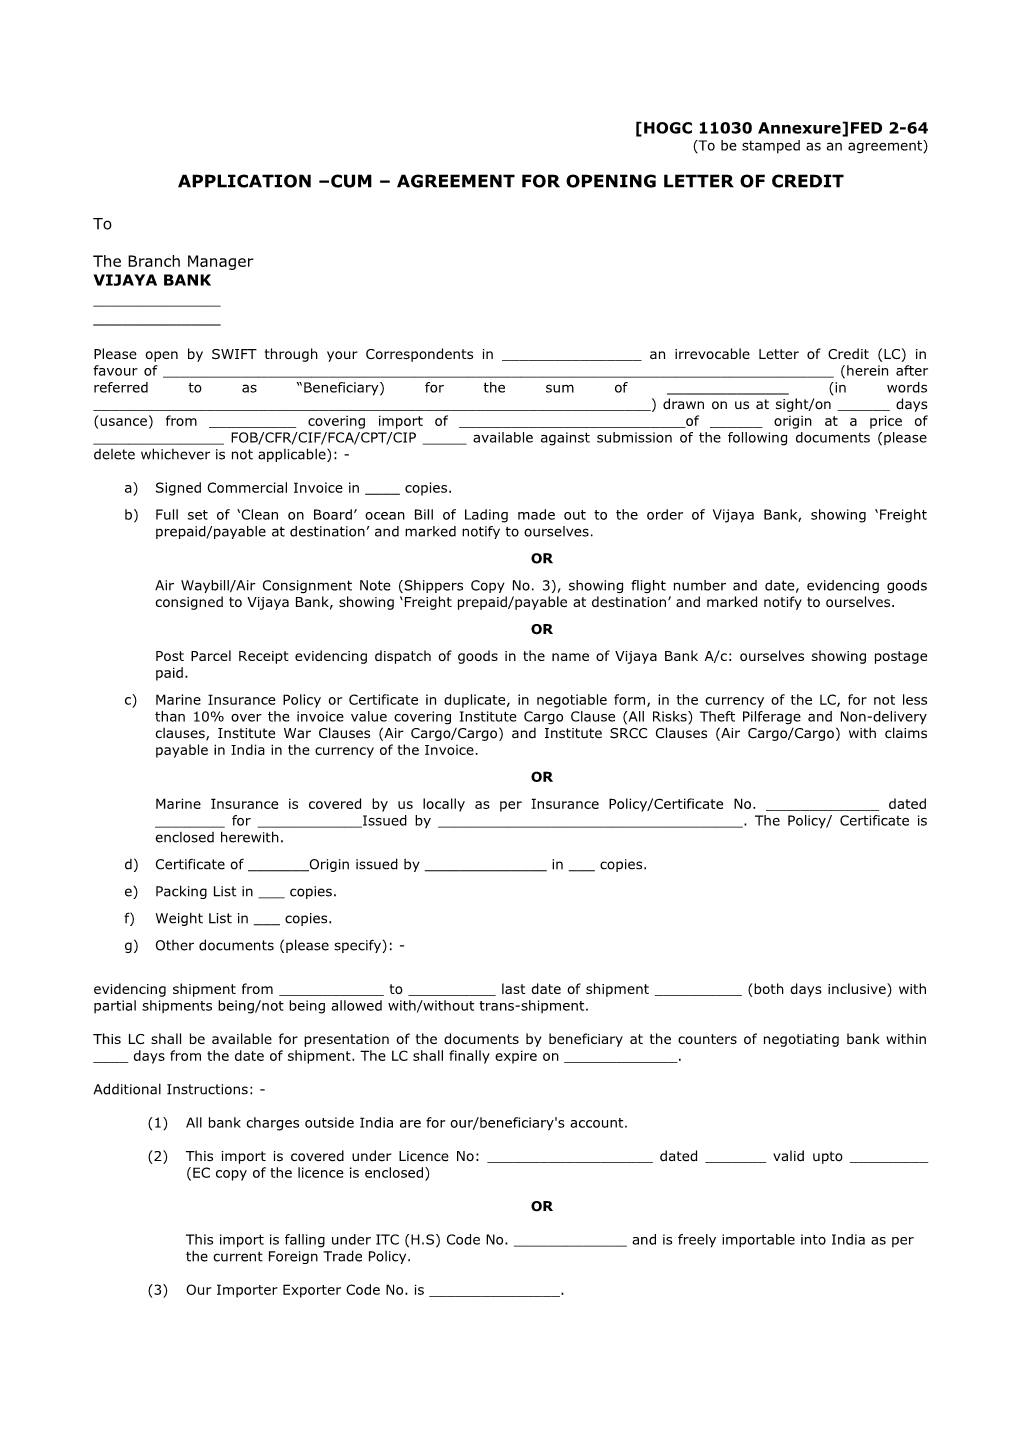 Application Cum Agreement for Openingletter of Credit